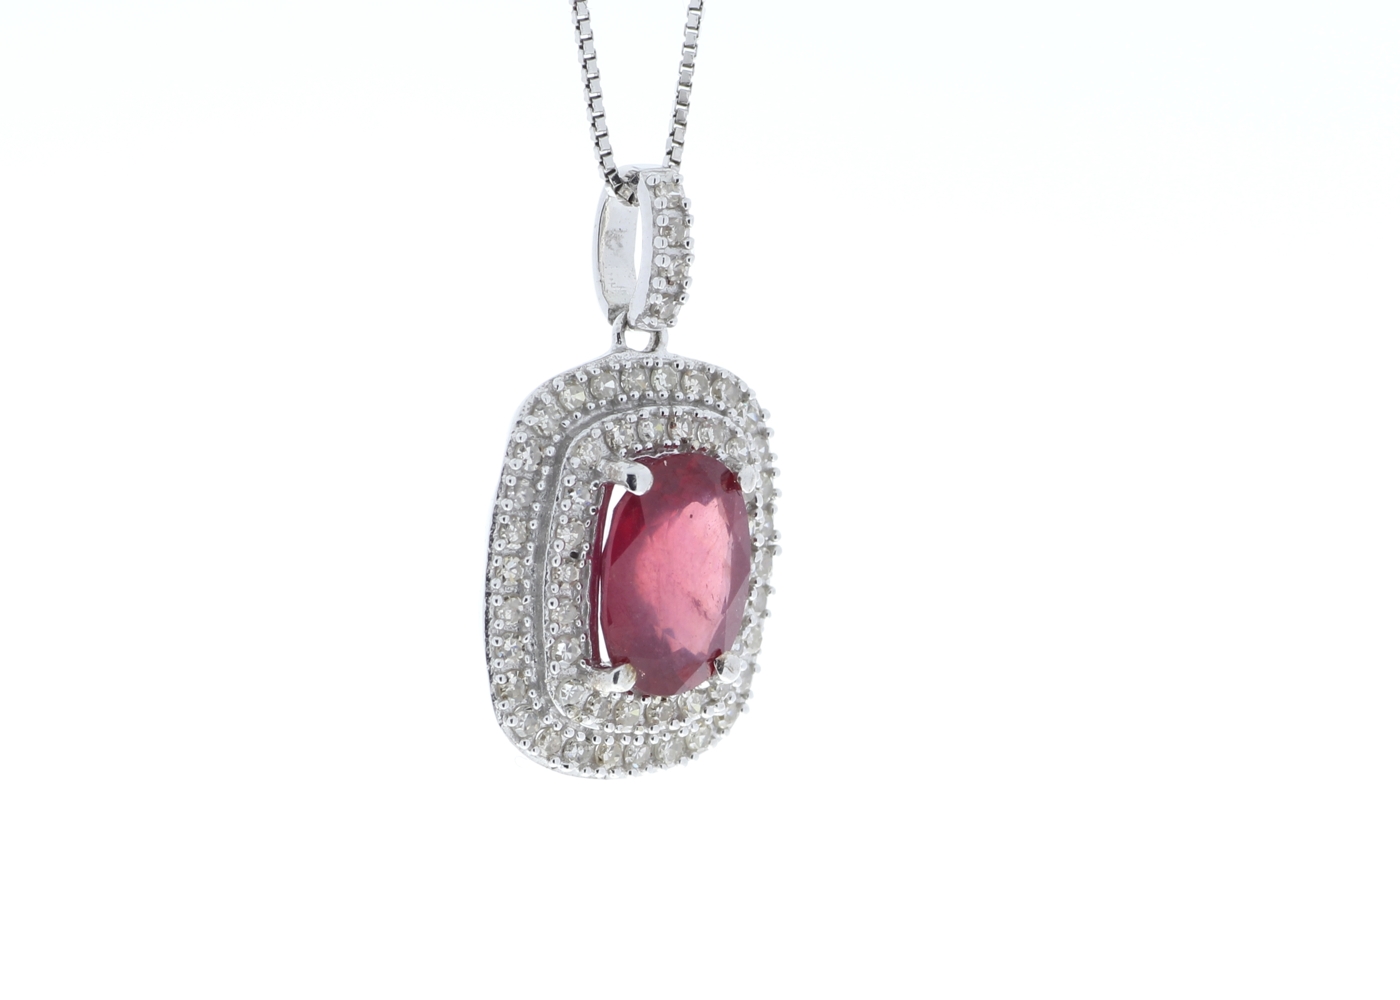 9ct White Gold Oval Ruby And Diamond Cluster Pendant 0.28 Carats - Image 2 of 6